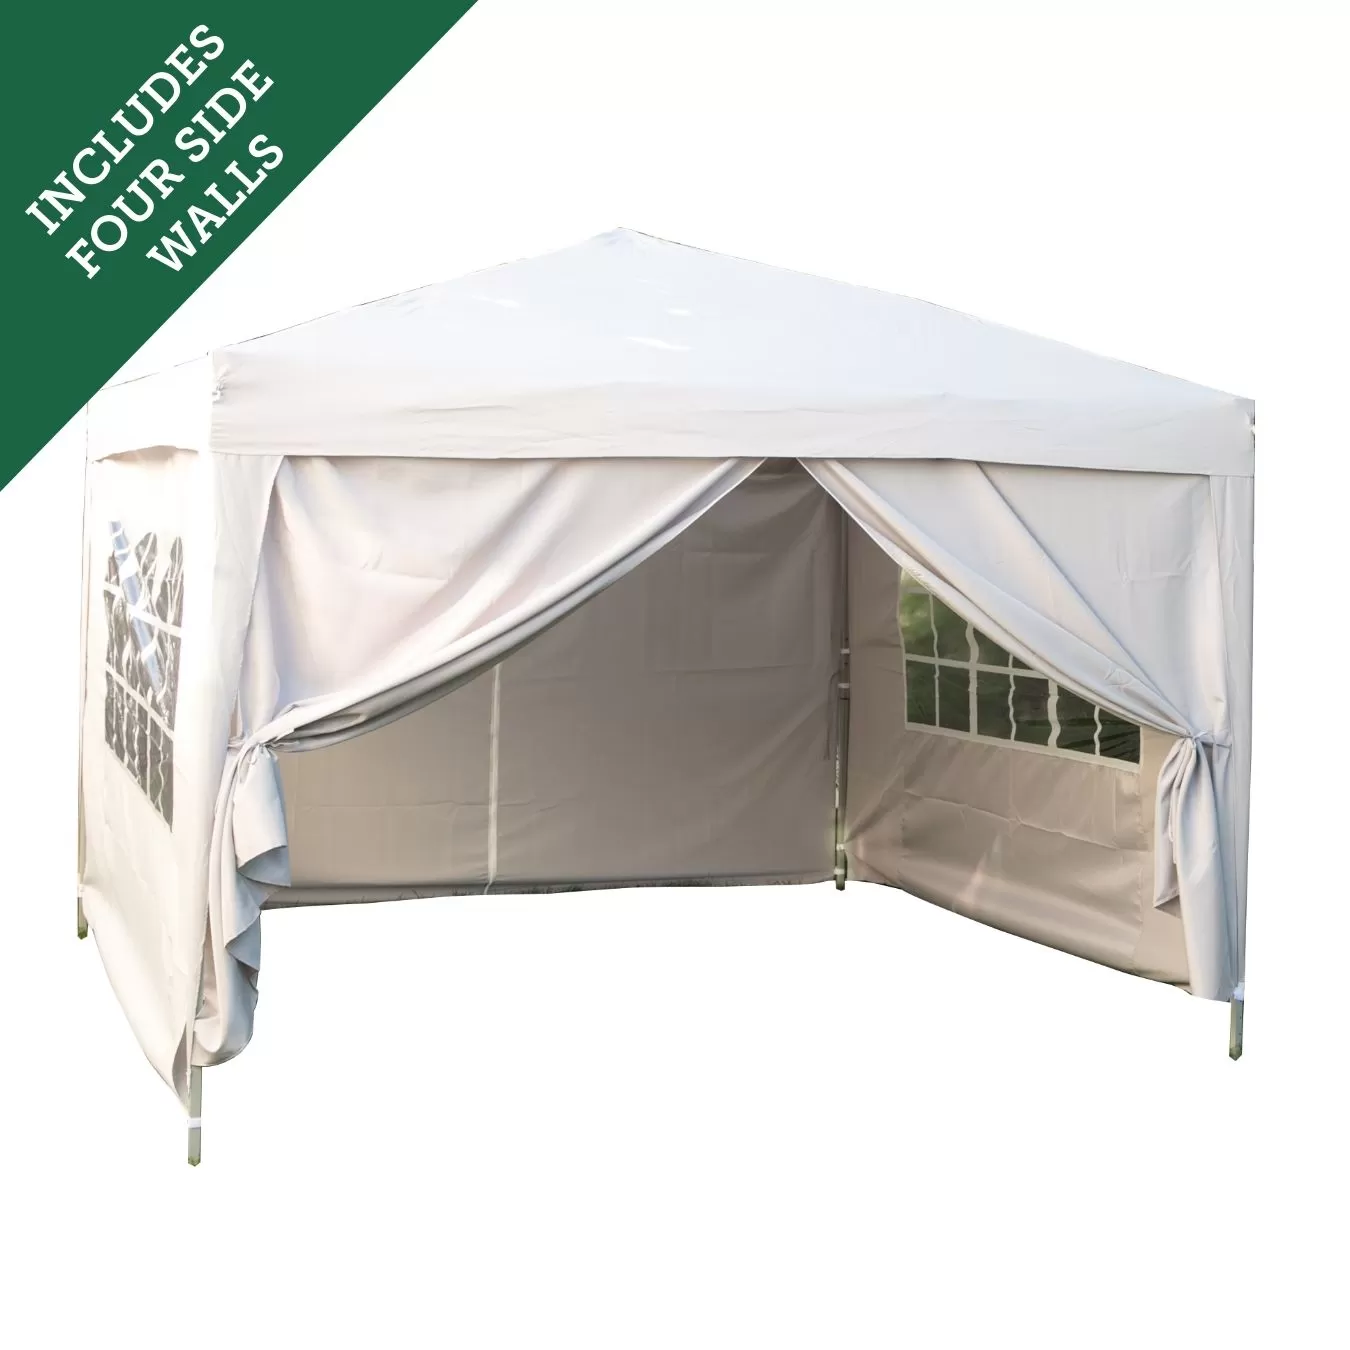 ShadeHaven by AriaLiving - Deluxe 3m x 3m Pop-up Gazebo with Four Side Walls